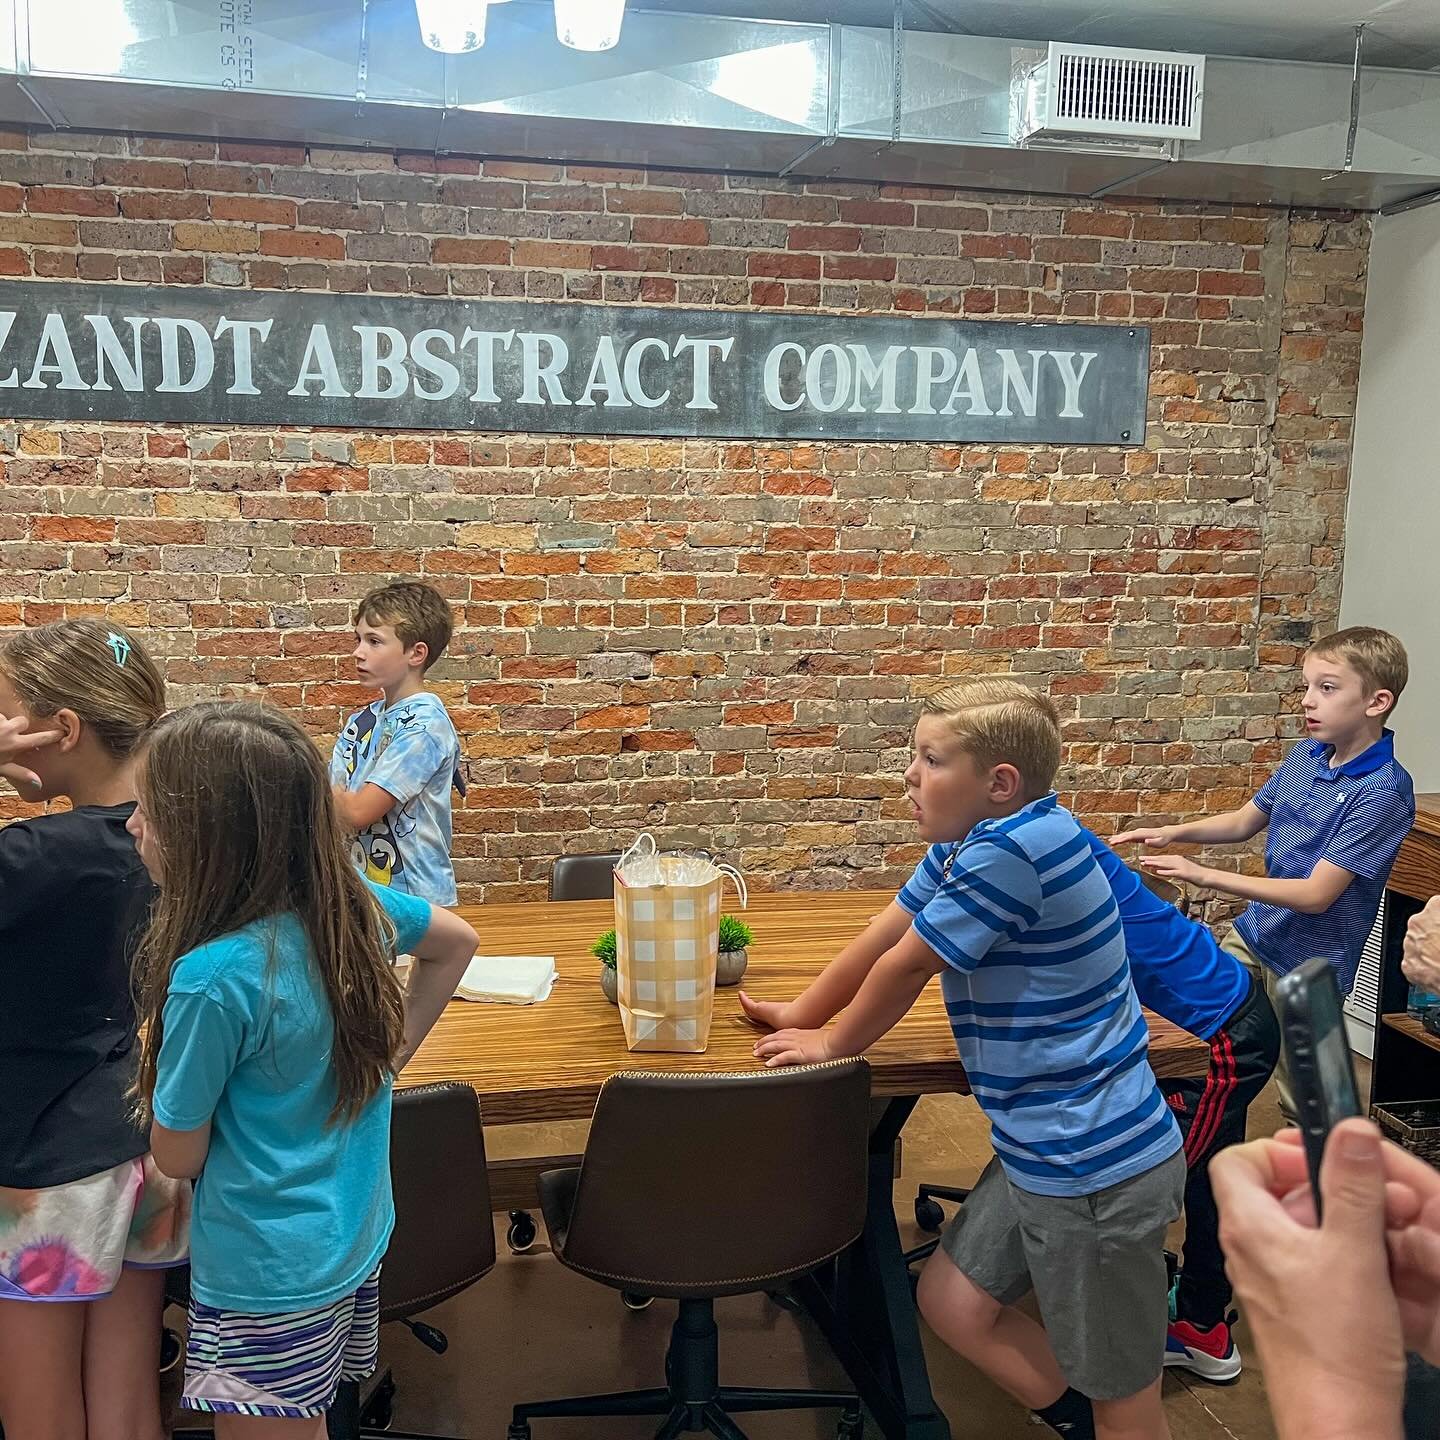 Van Zandt Abstract had some very important guests this morning!!! Debby led 12 gifted and talented students from @cantonelementary around the office, explaining what we do here and gave each one an official notepad and pen needed to take care of busi